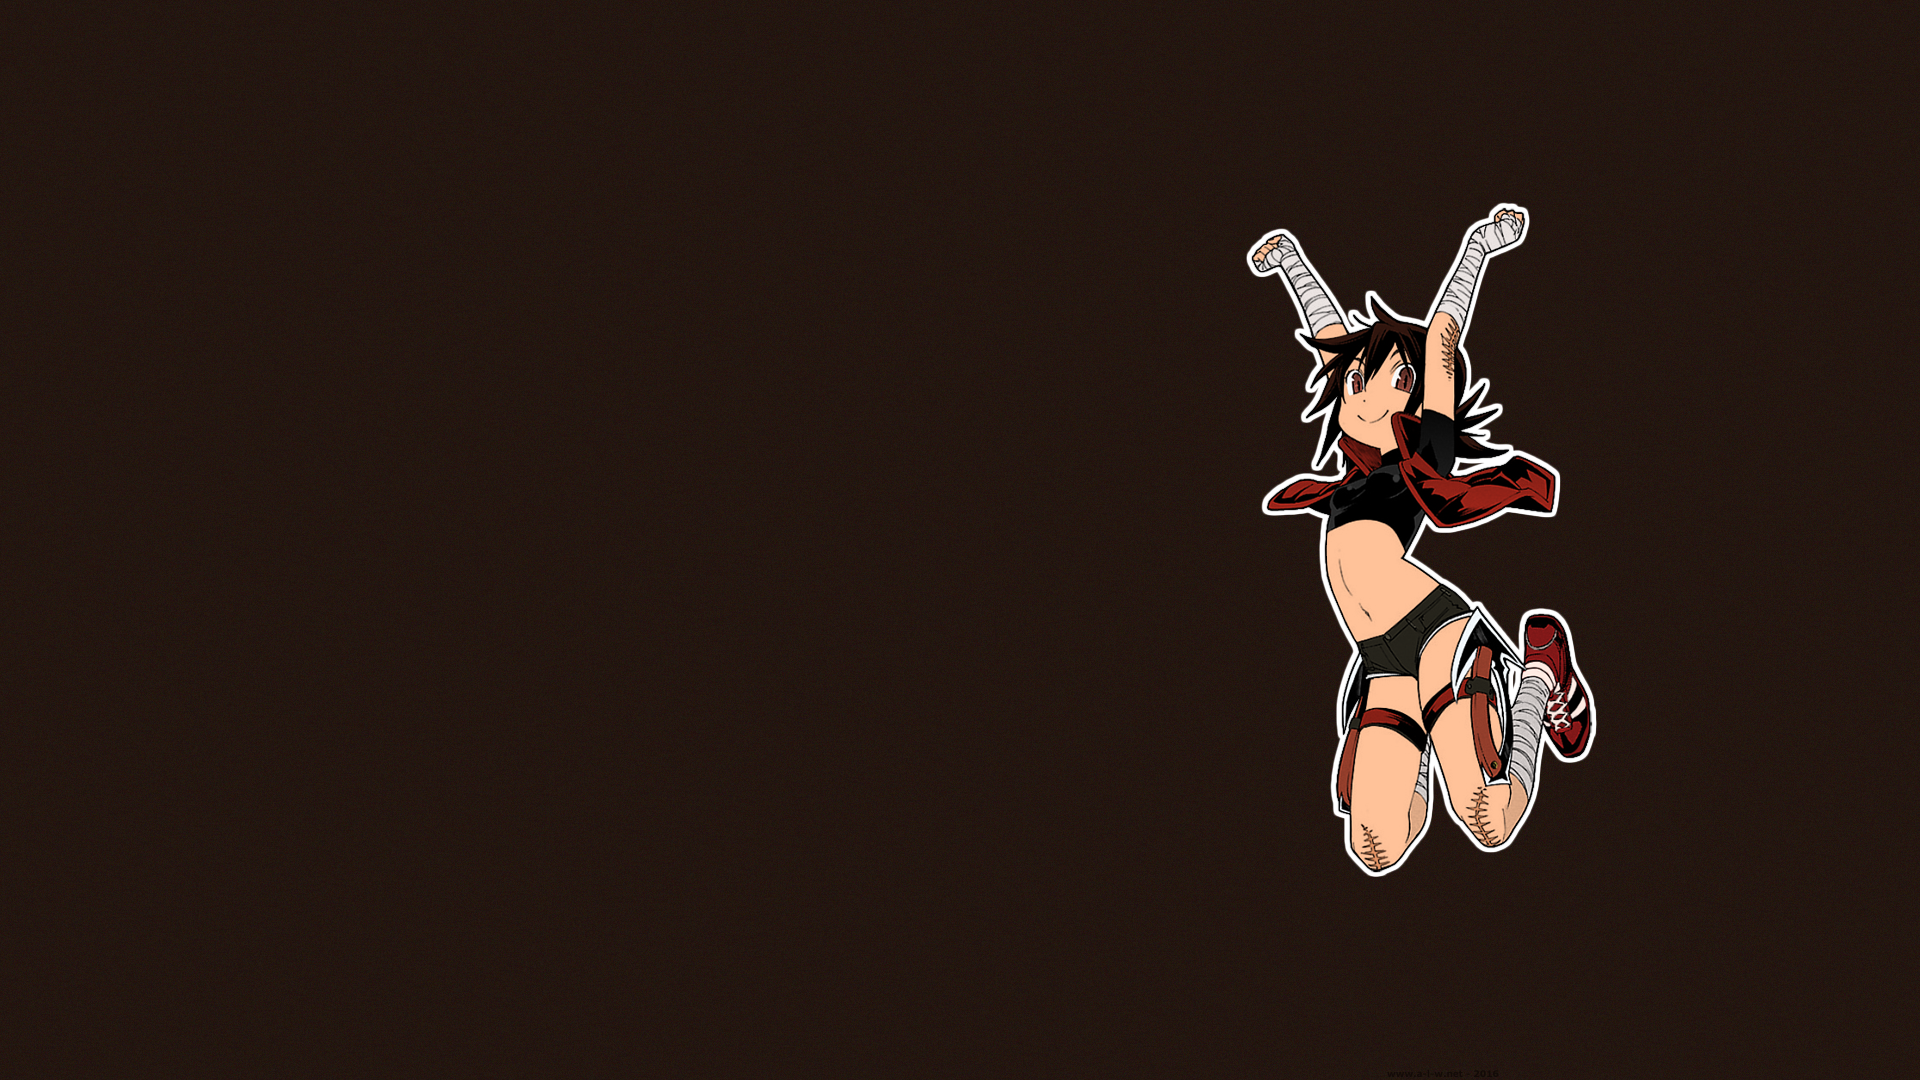 Anime 1920x1080 D.P Shirato Marin tomboys brunette brown eyes short pants weapon battle axe smiling bandages scars anime manga anime girls Trash. short shorts brown background simple background shoulder length hair belly red shoes arms up pants